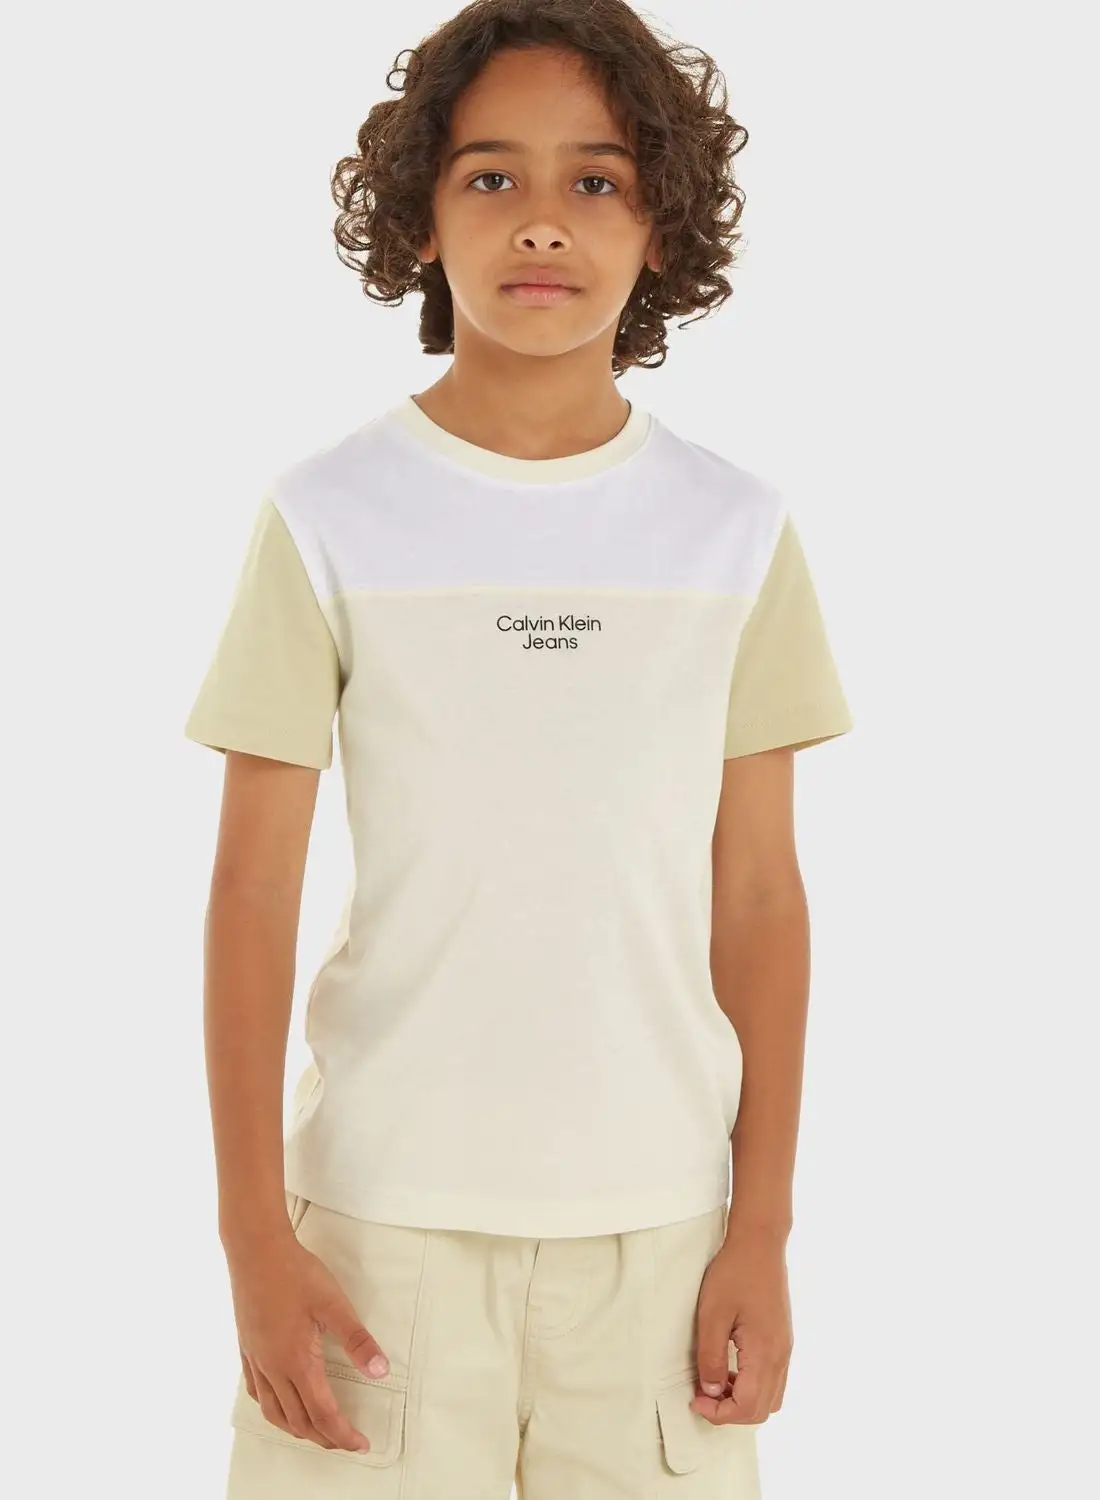 Calvin Klein Jeans Youth Color Block T-Shirt